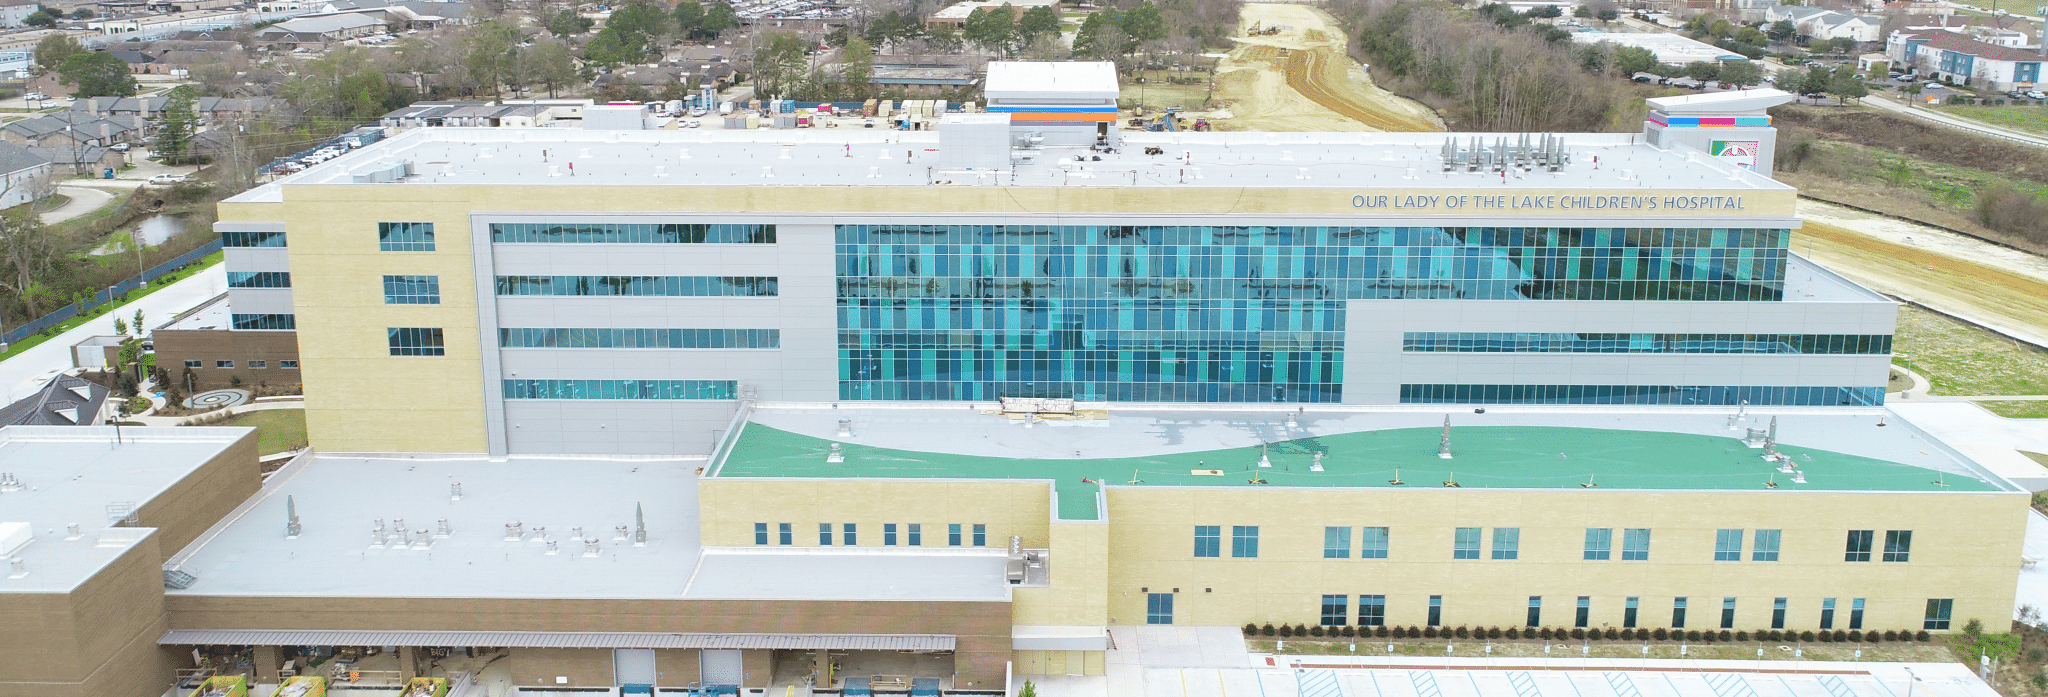 Baton Rouge Children's Hospital commerical roofing project